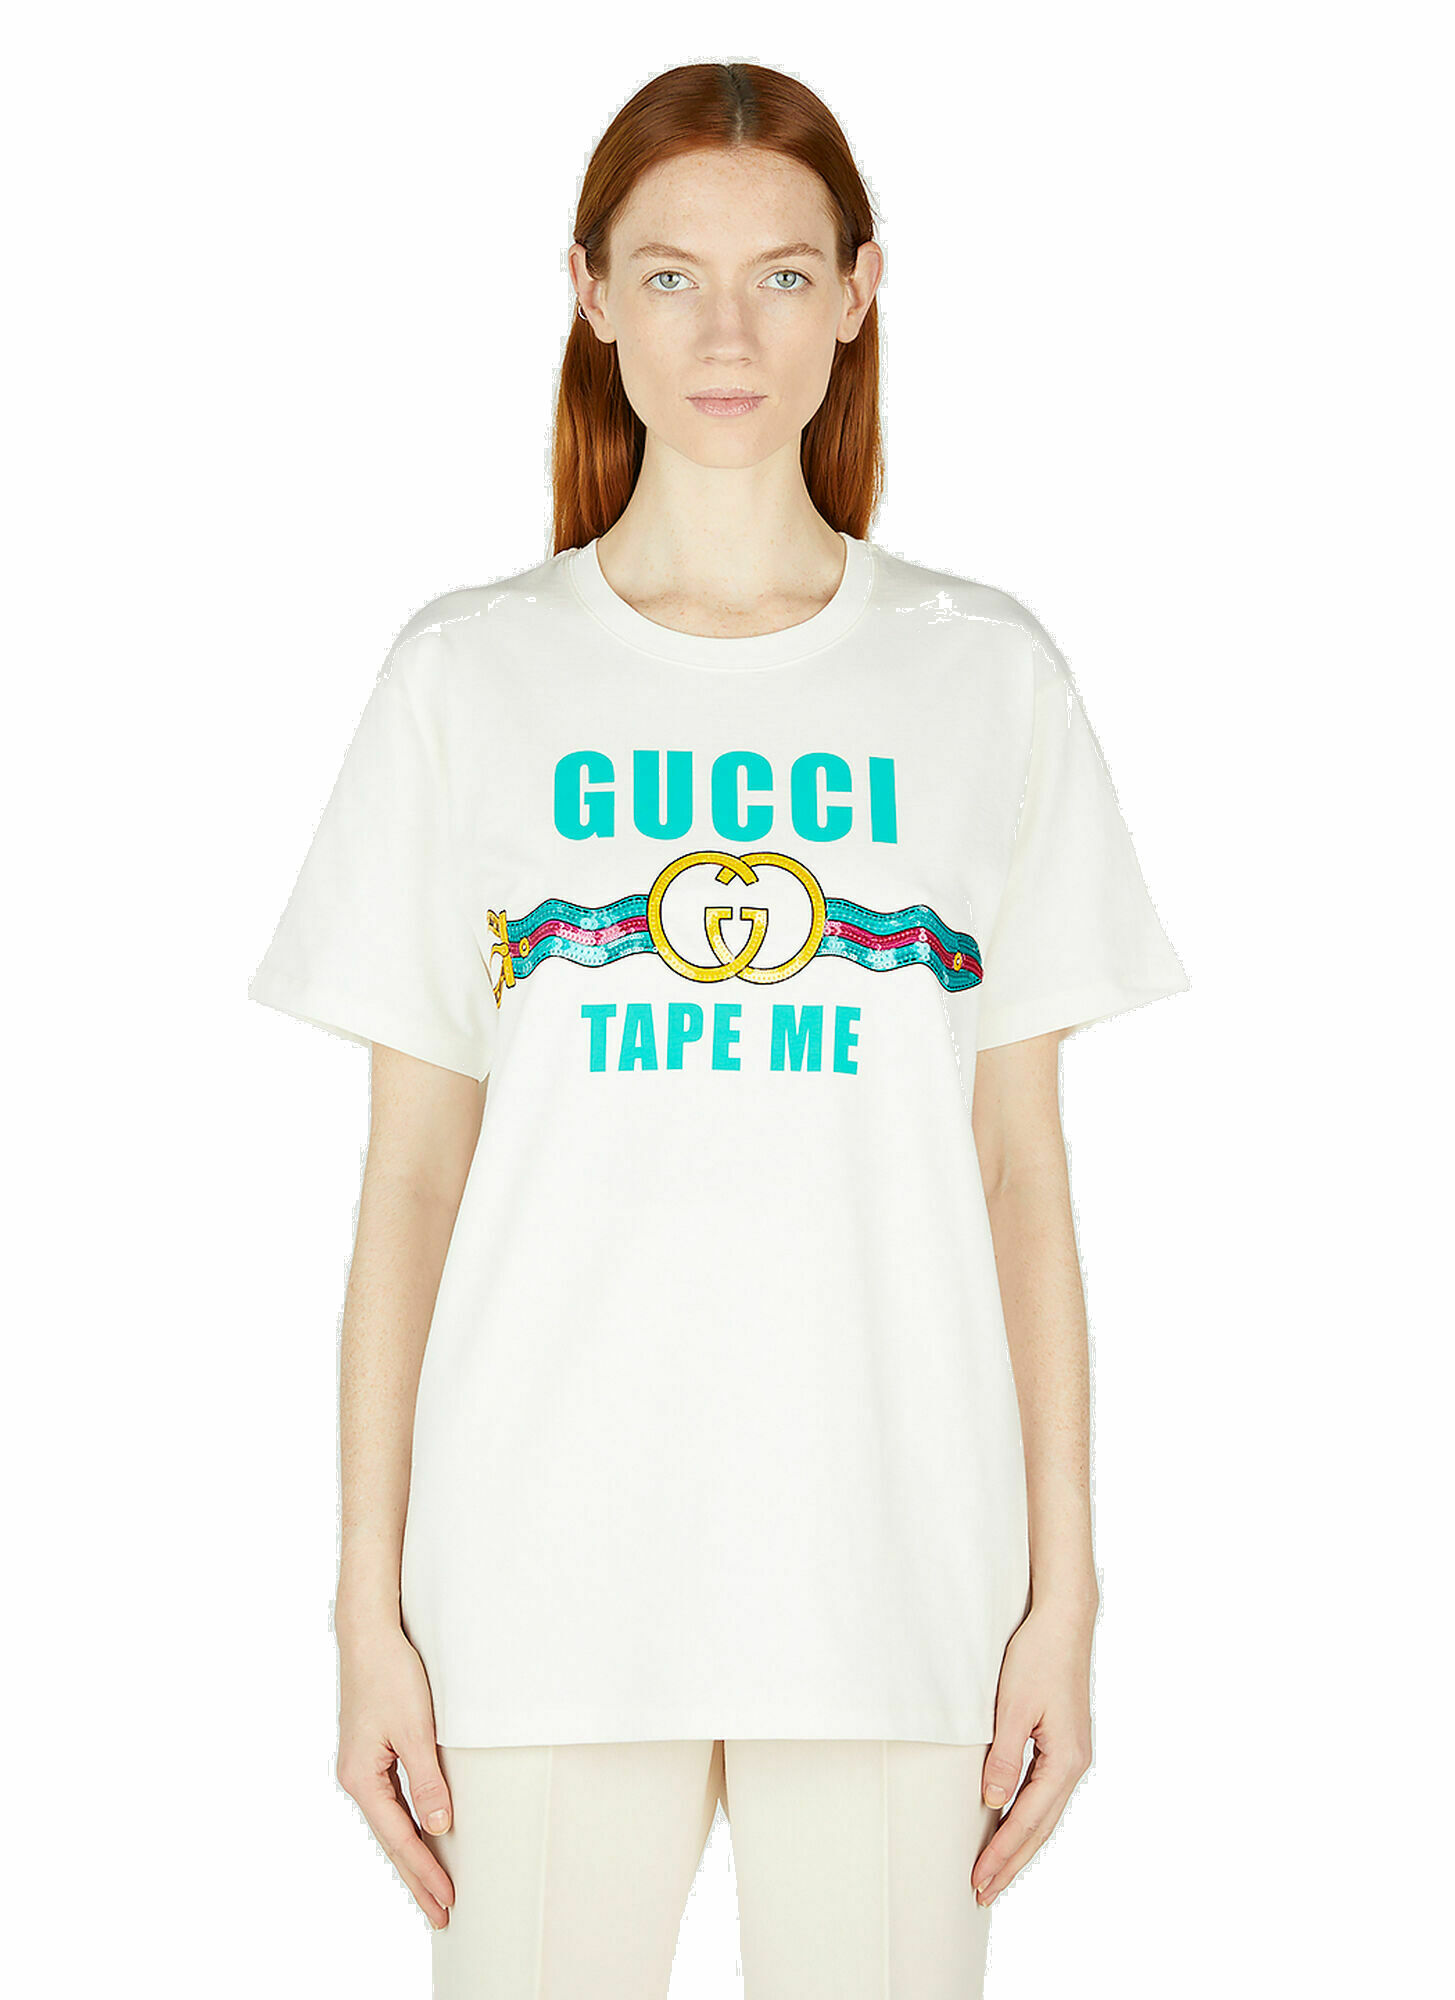 Gucci - G-Loved T-Shirt in White Gucci